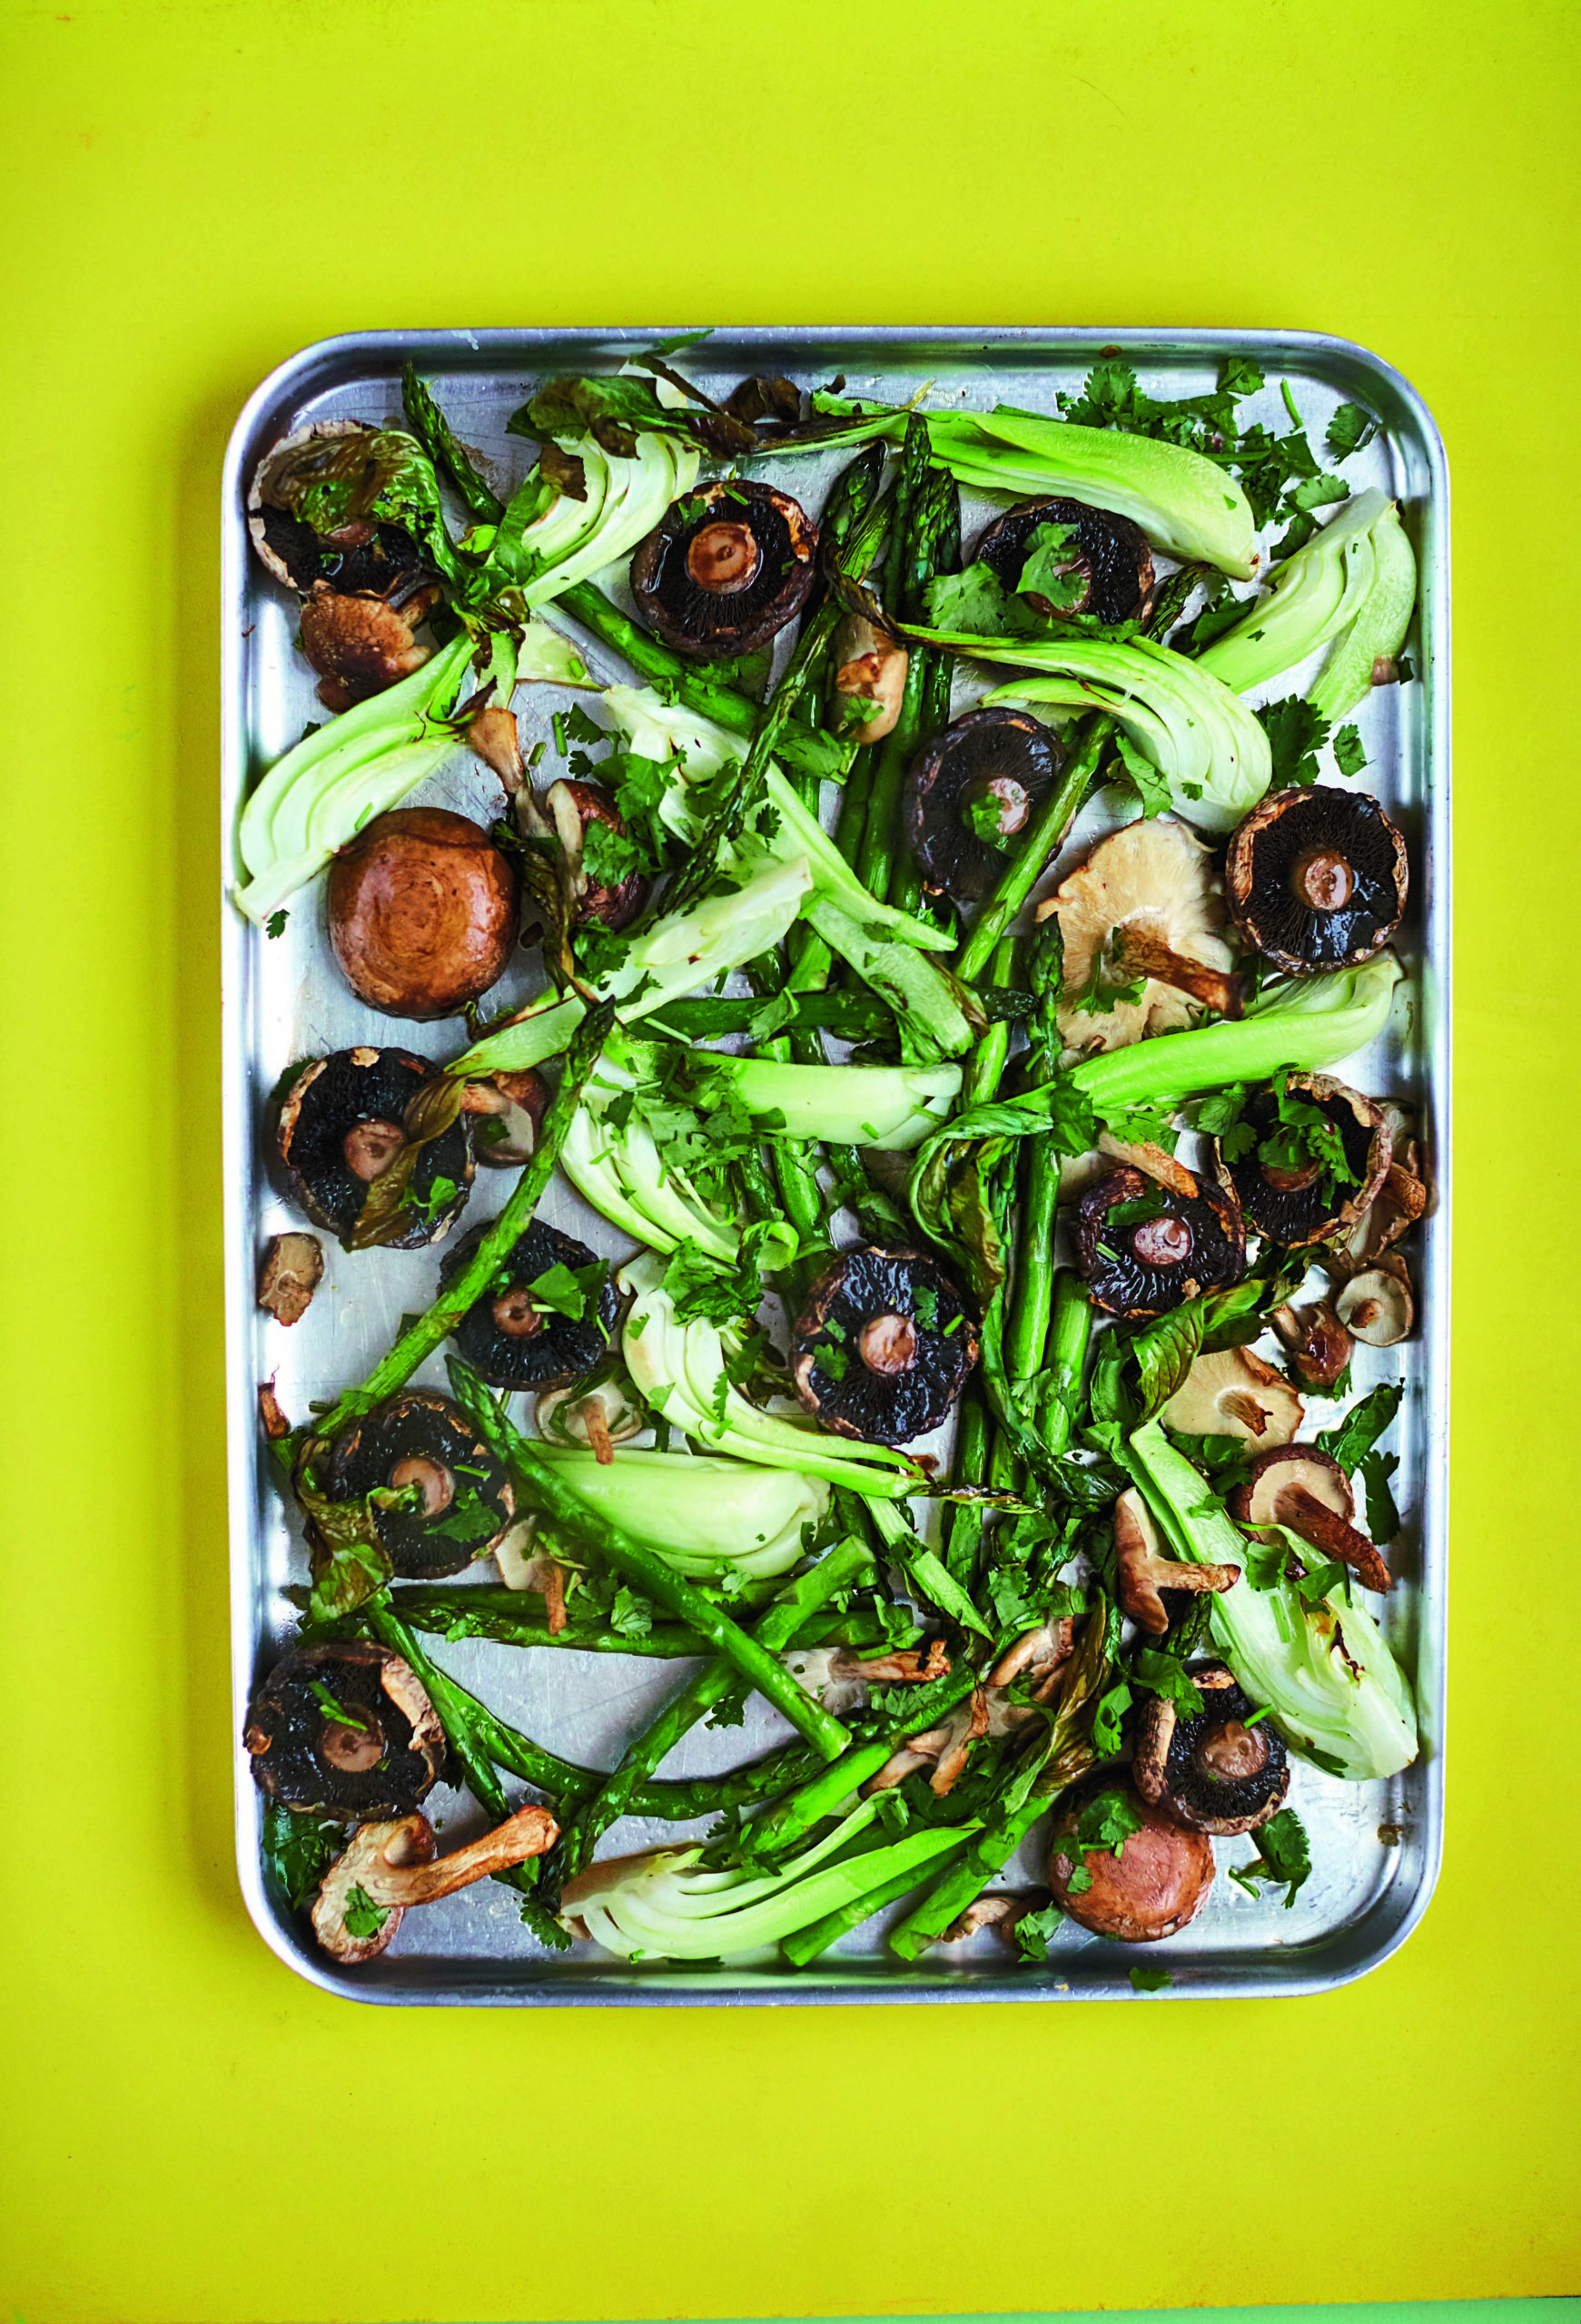 Lime and Coriander Mushrooms With Pak Choi and Asparagus